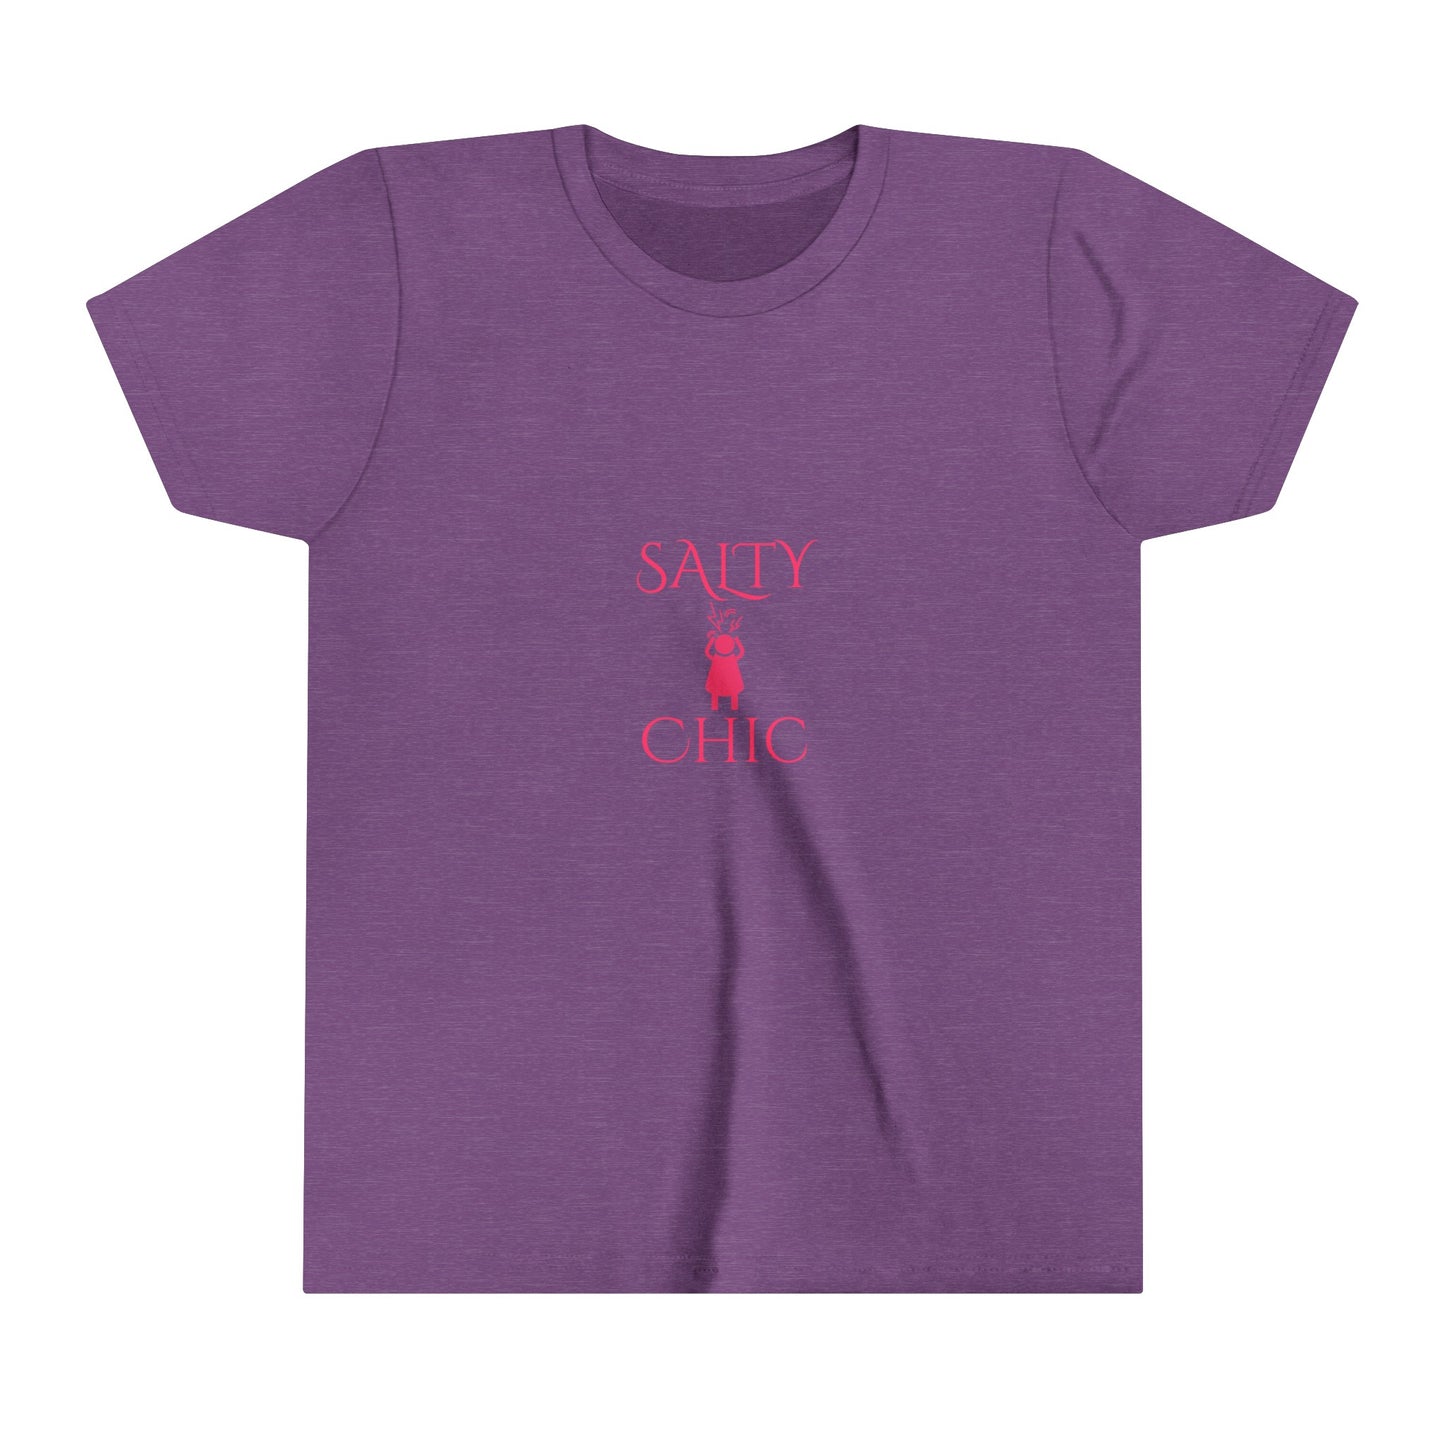 Salty Chic Screaming Woman Young Girls Short Sleeve Tee